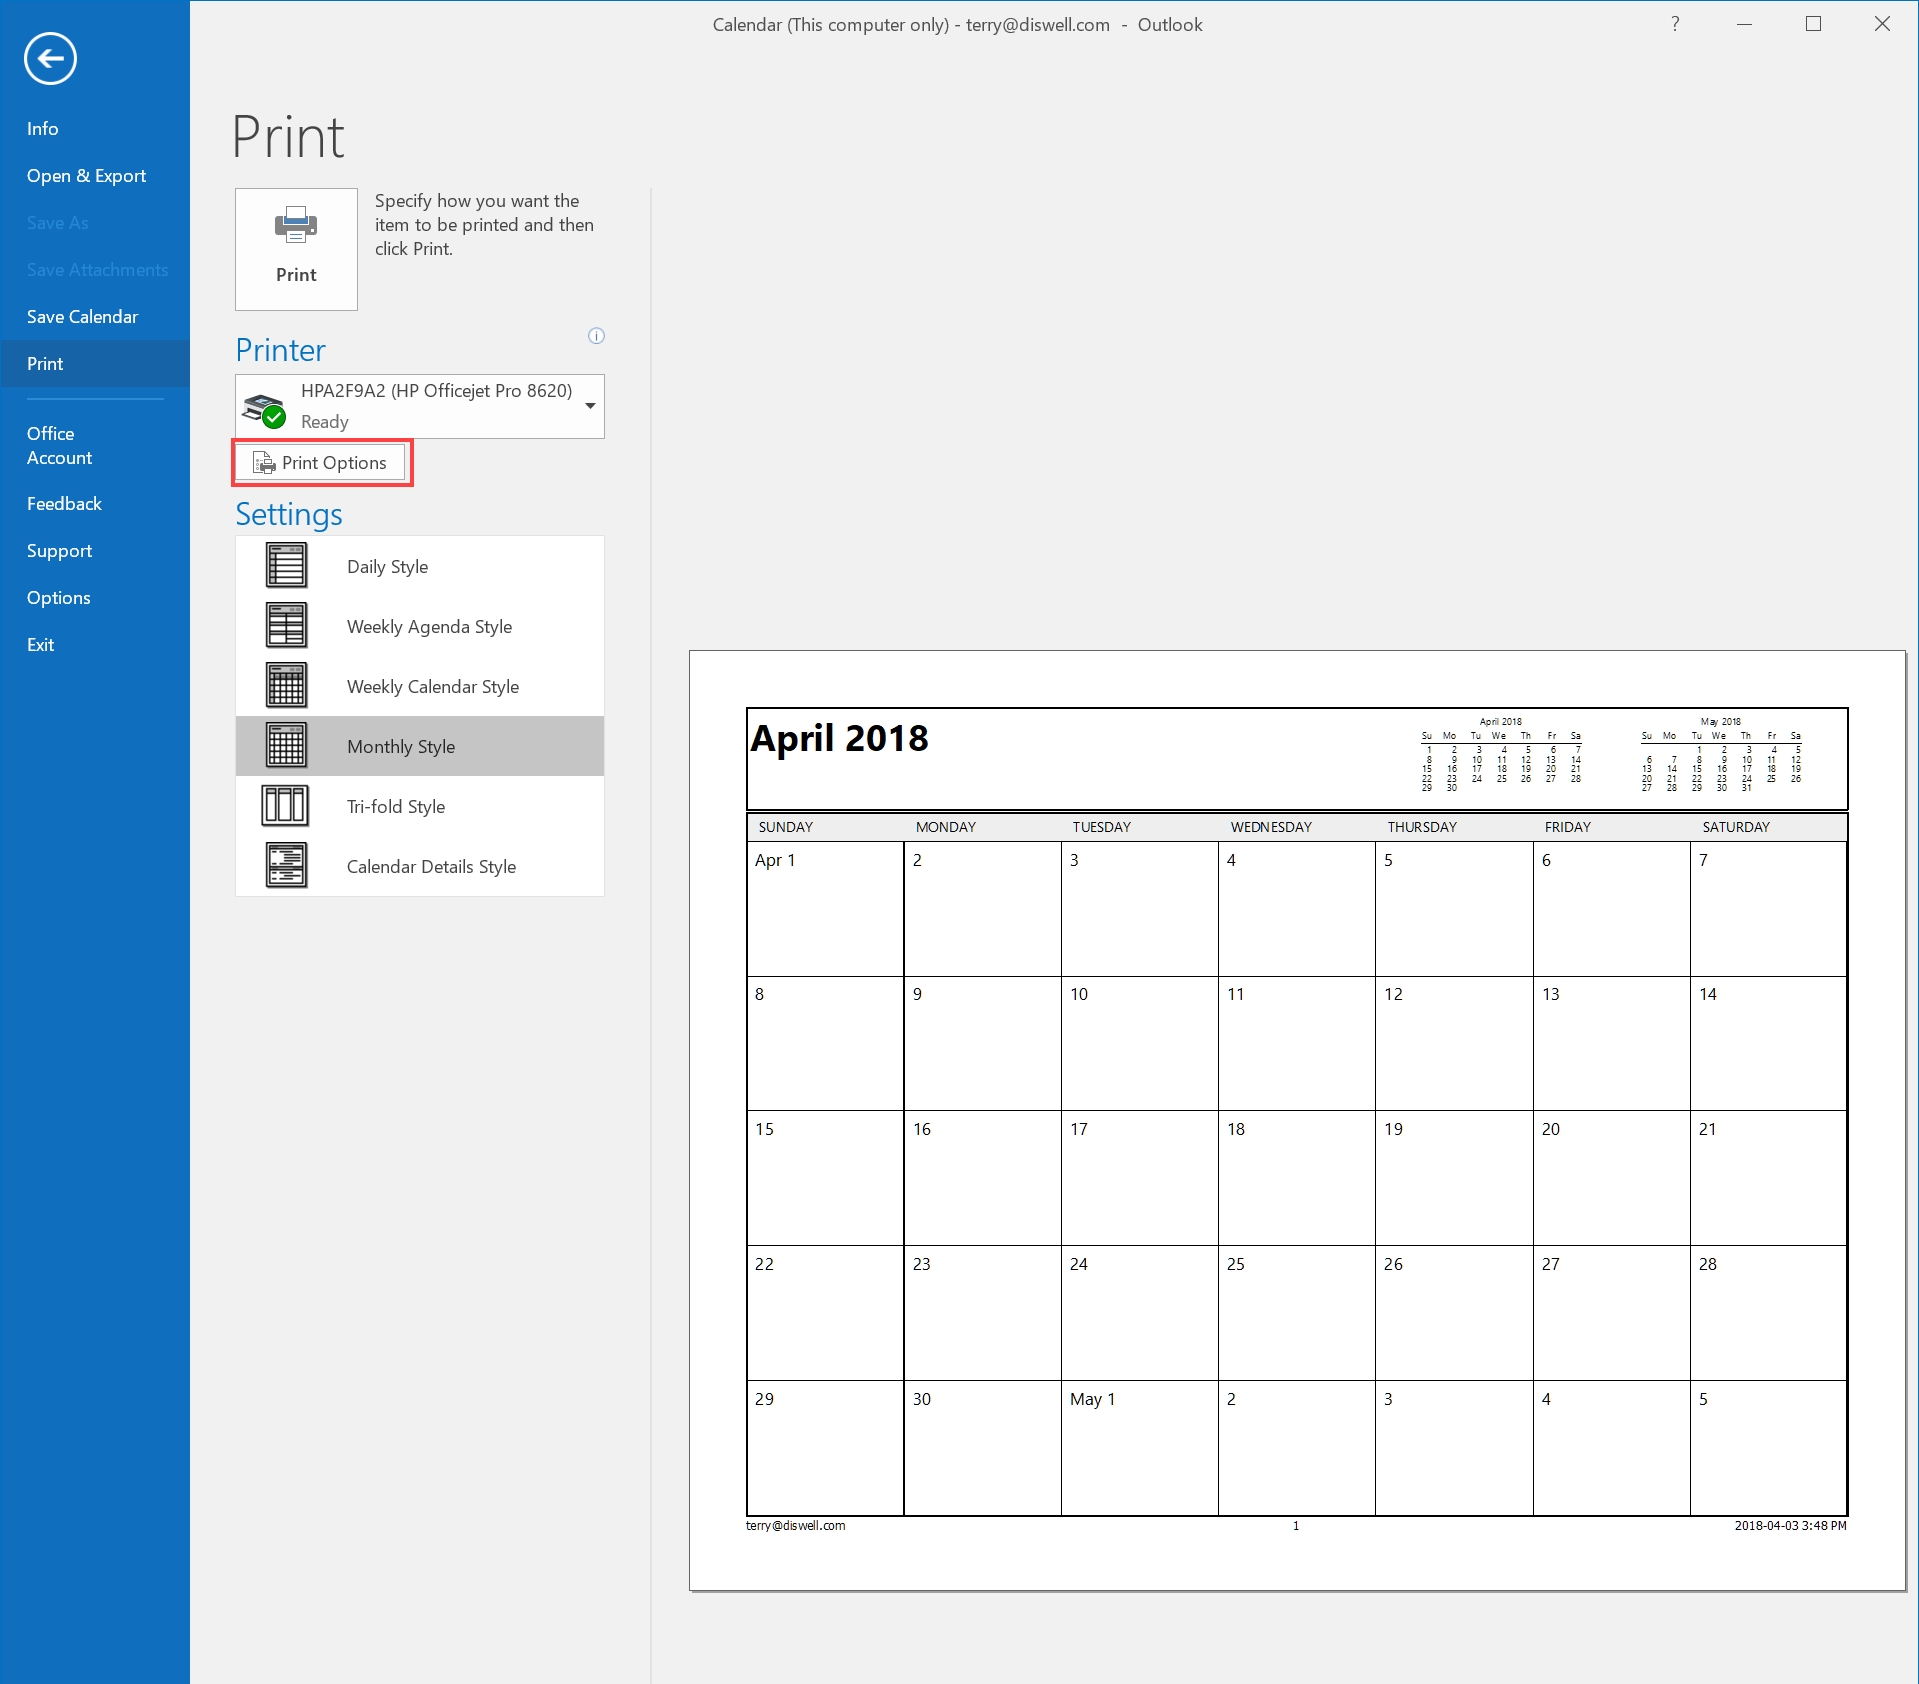 How To Email Or Print Your Calendar In Outlook 2016